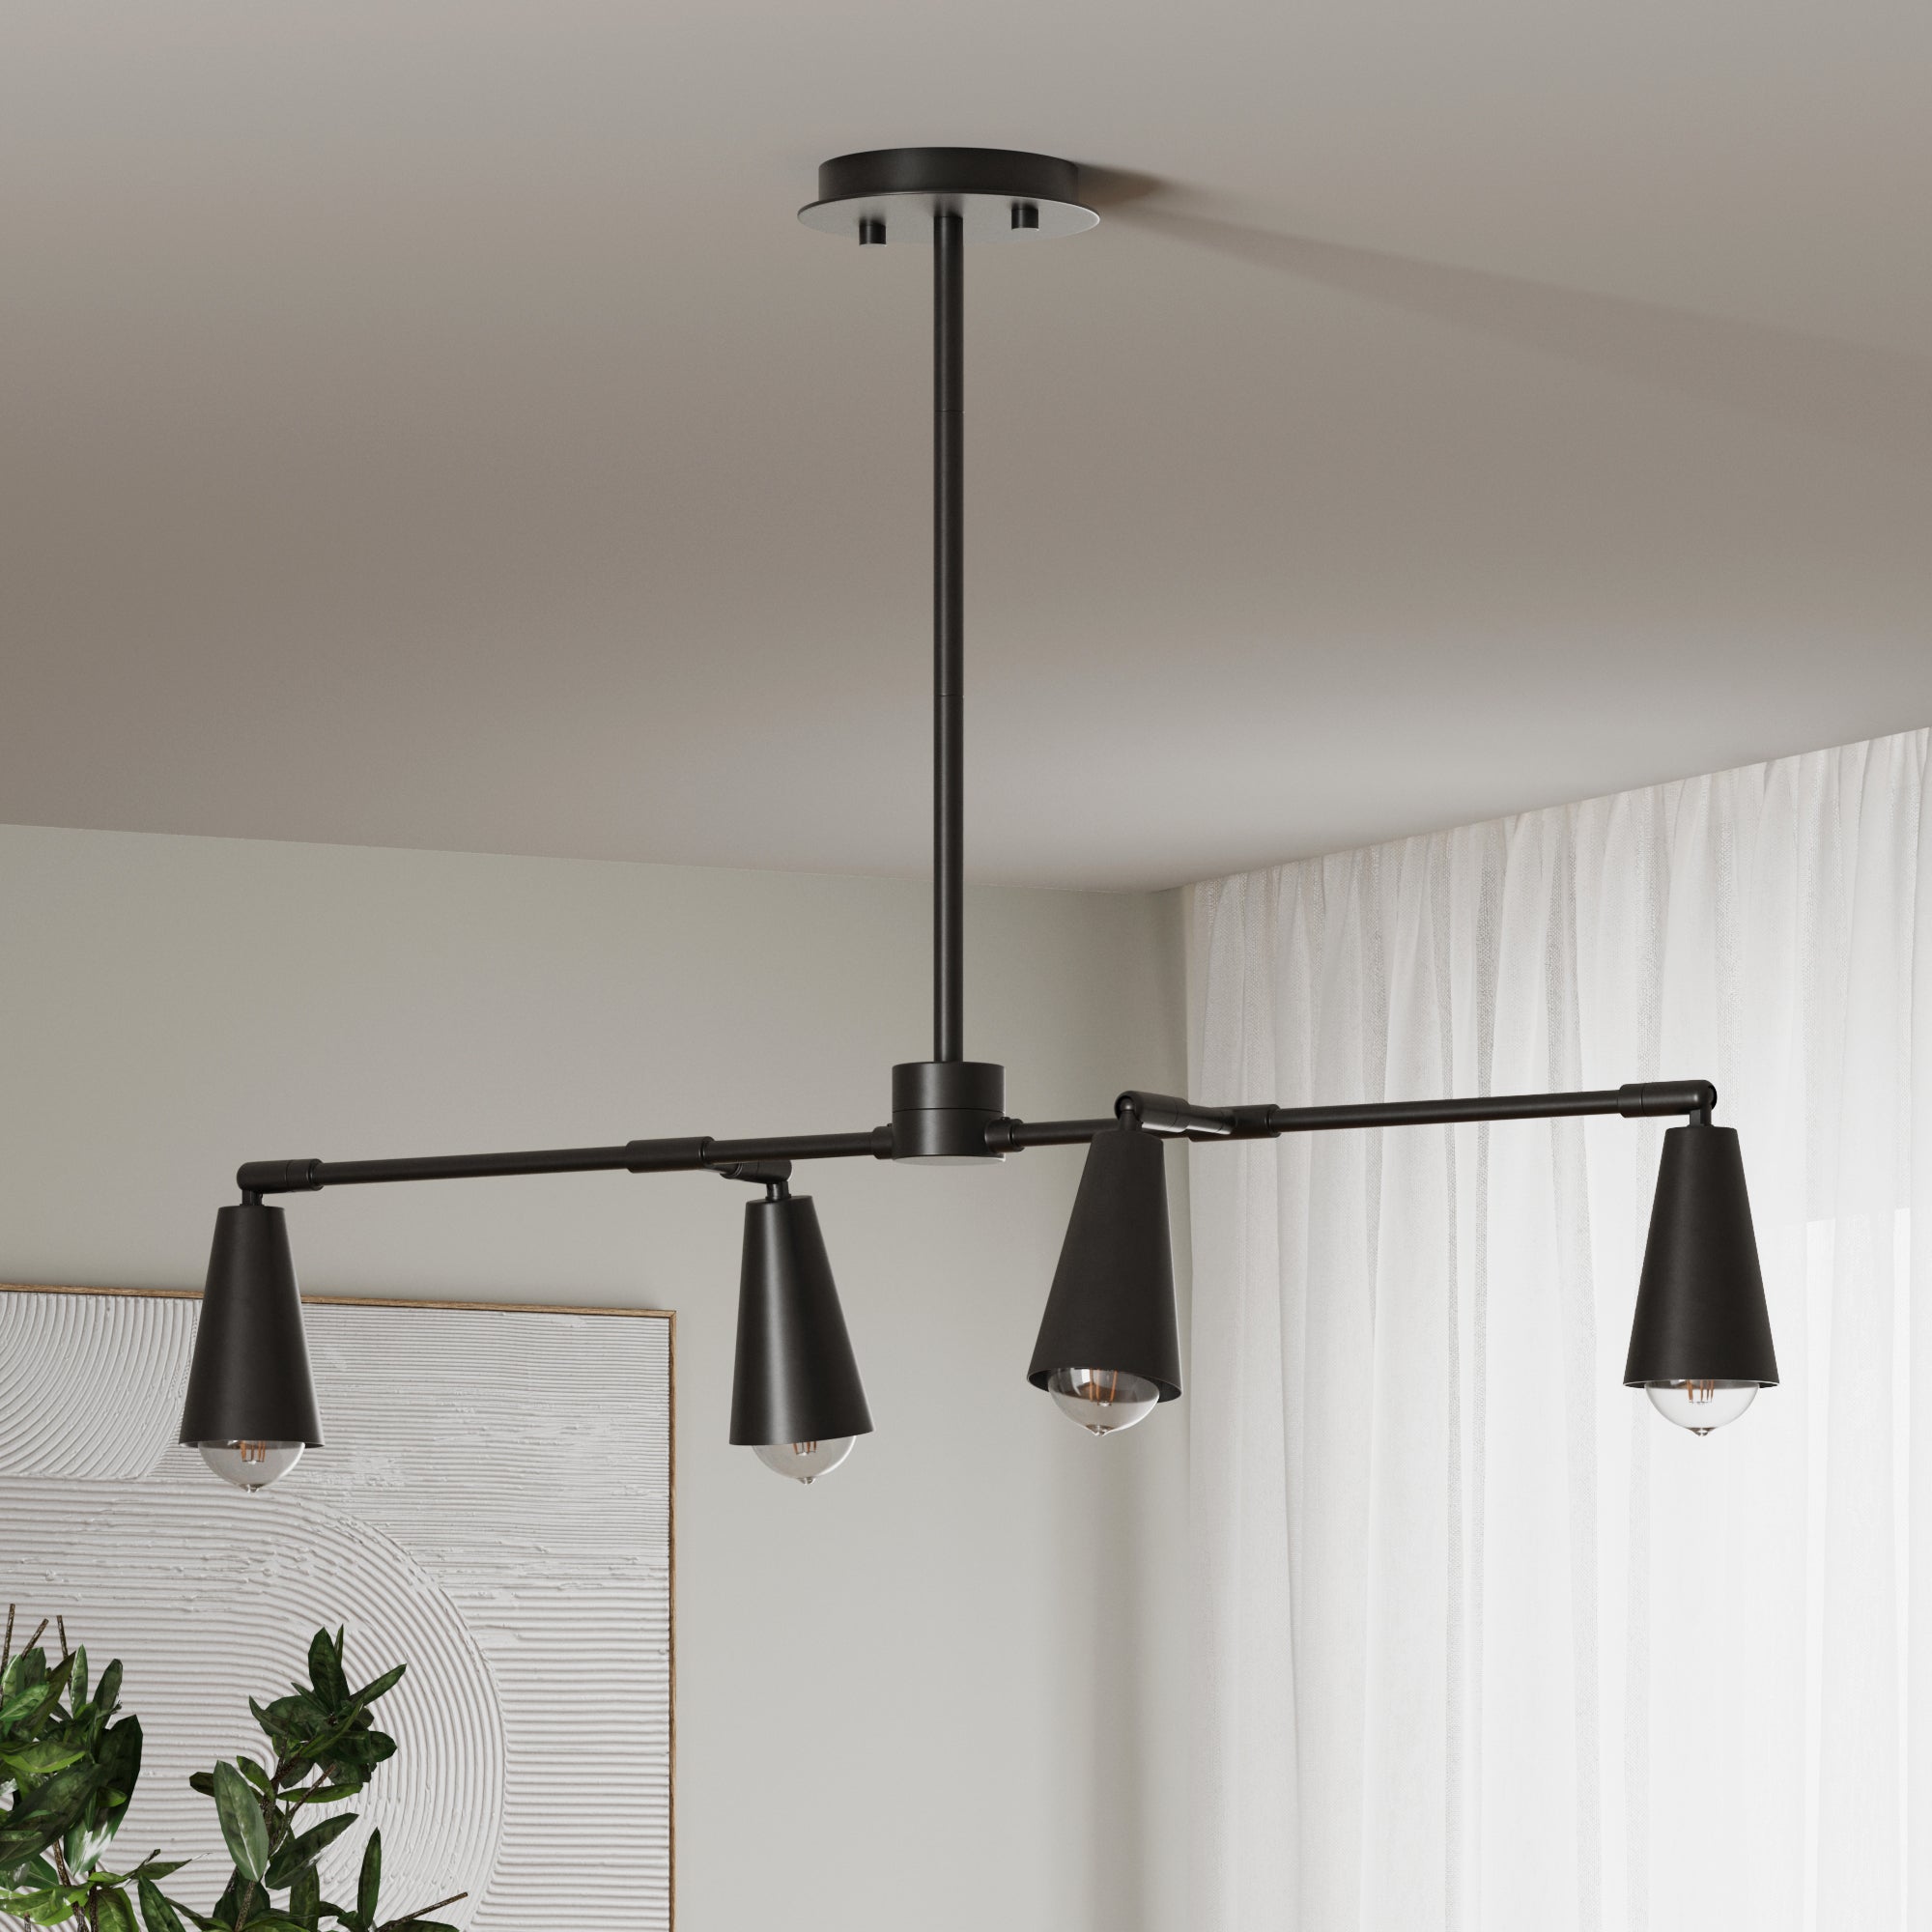 Nathan James black metal track light with 4 bulbs hung on ceiling in a room with white walls